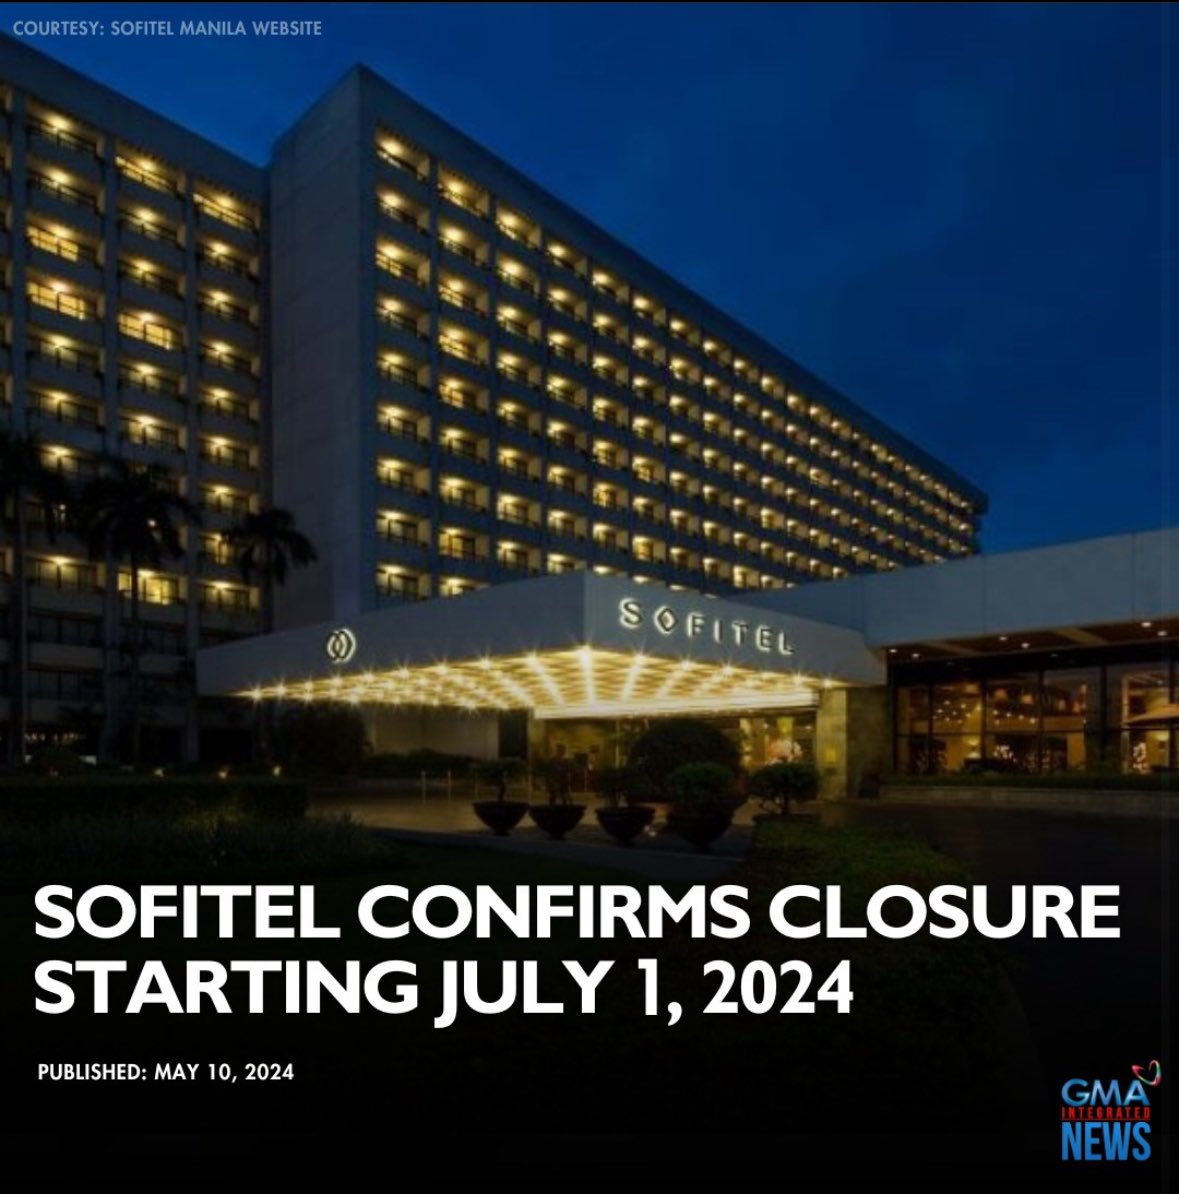 Buti na lang we alteady experienced mag staycation dito. 

Thank you Sofitel! 🥲🥲🥲